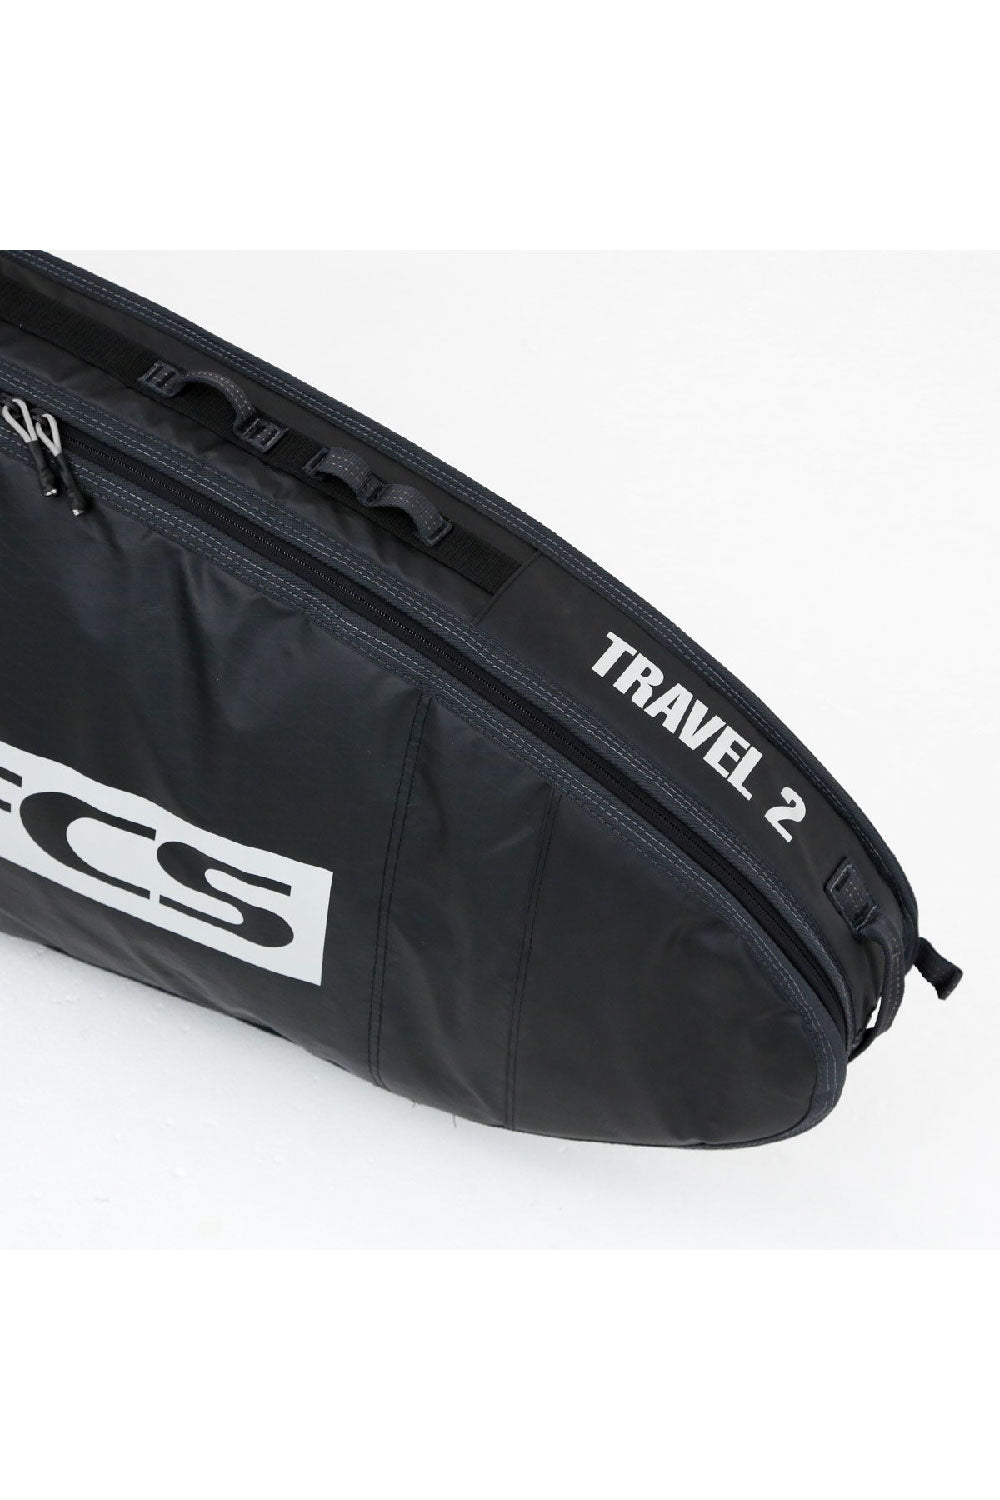 FCS Travel 2 Funboard Board Cover